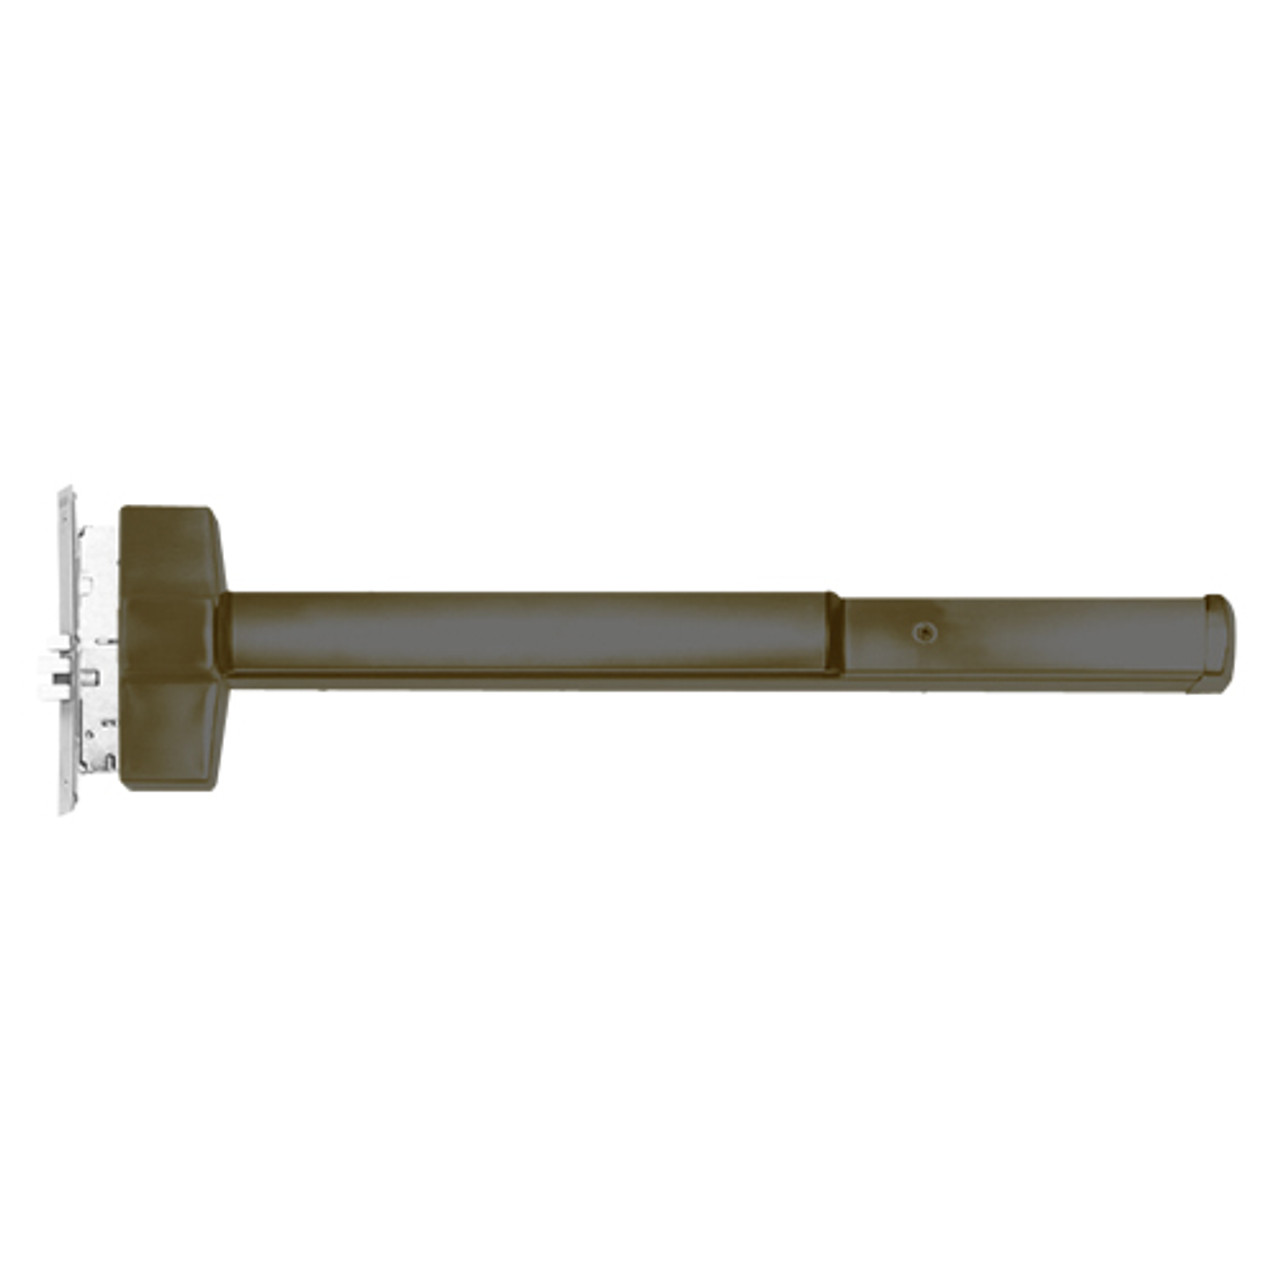 ED5600L-613-W048-LHR-SAF Corbin ED5600 Series Non Fire Rated Mortise Exit Device in Oil Rubbed Bronze Finish